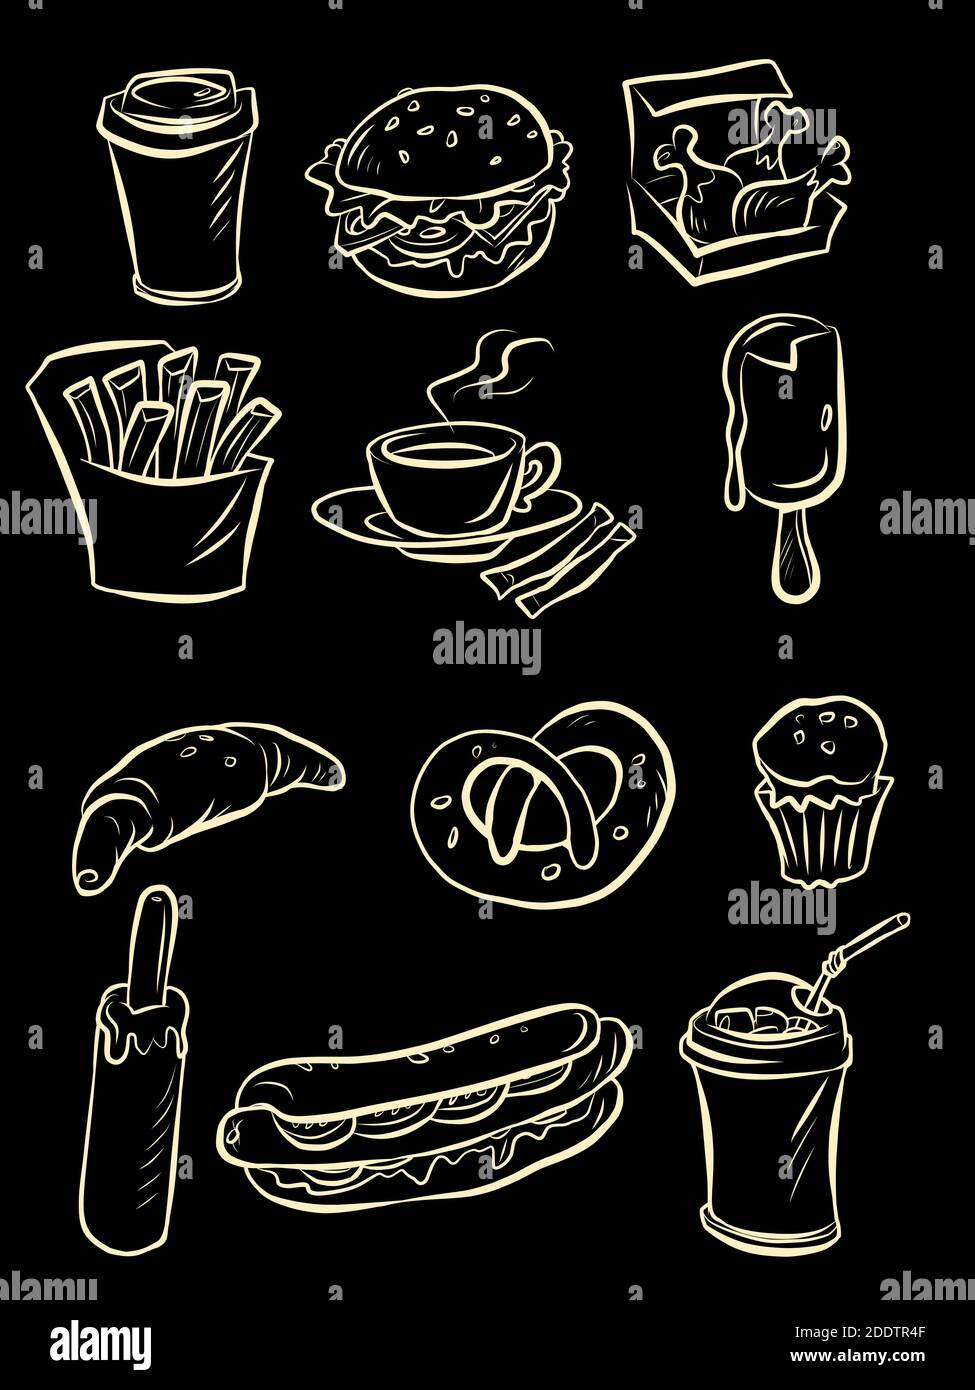 Snacks street food collection set icons symbols sketch hand drawing Stock Vector